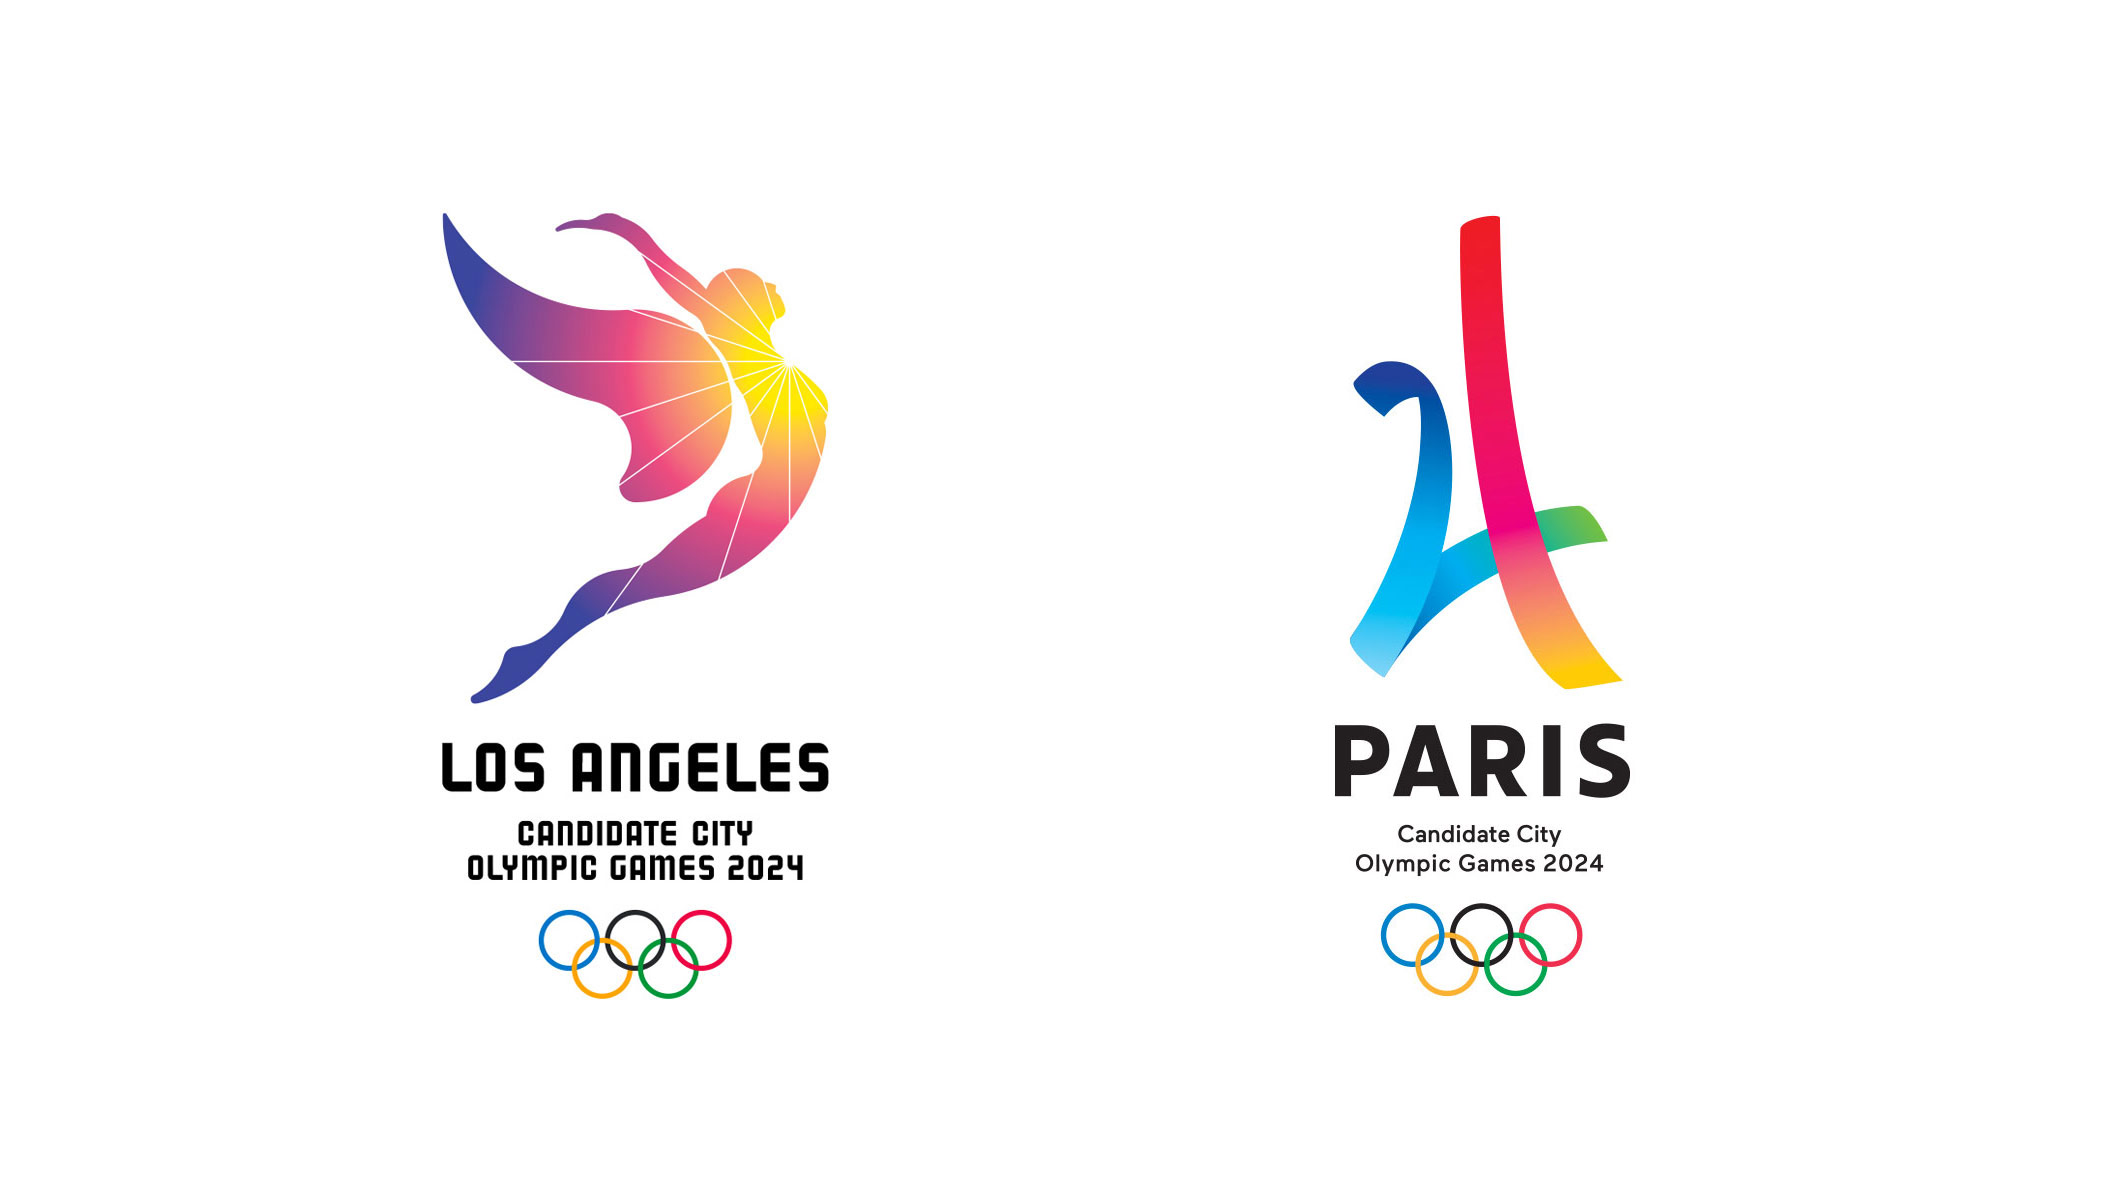 IOC Evaluation Commission Olympic Games 2024 Begins Candidate Review - Olympic News